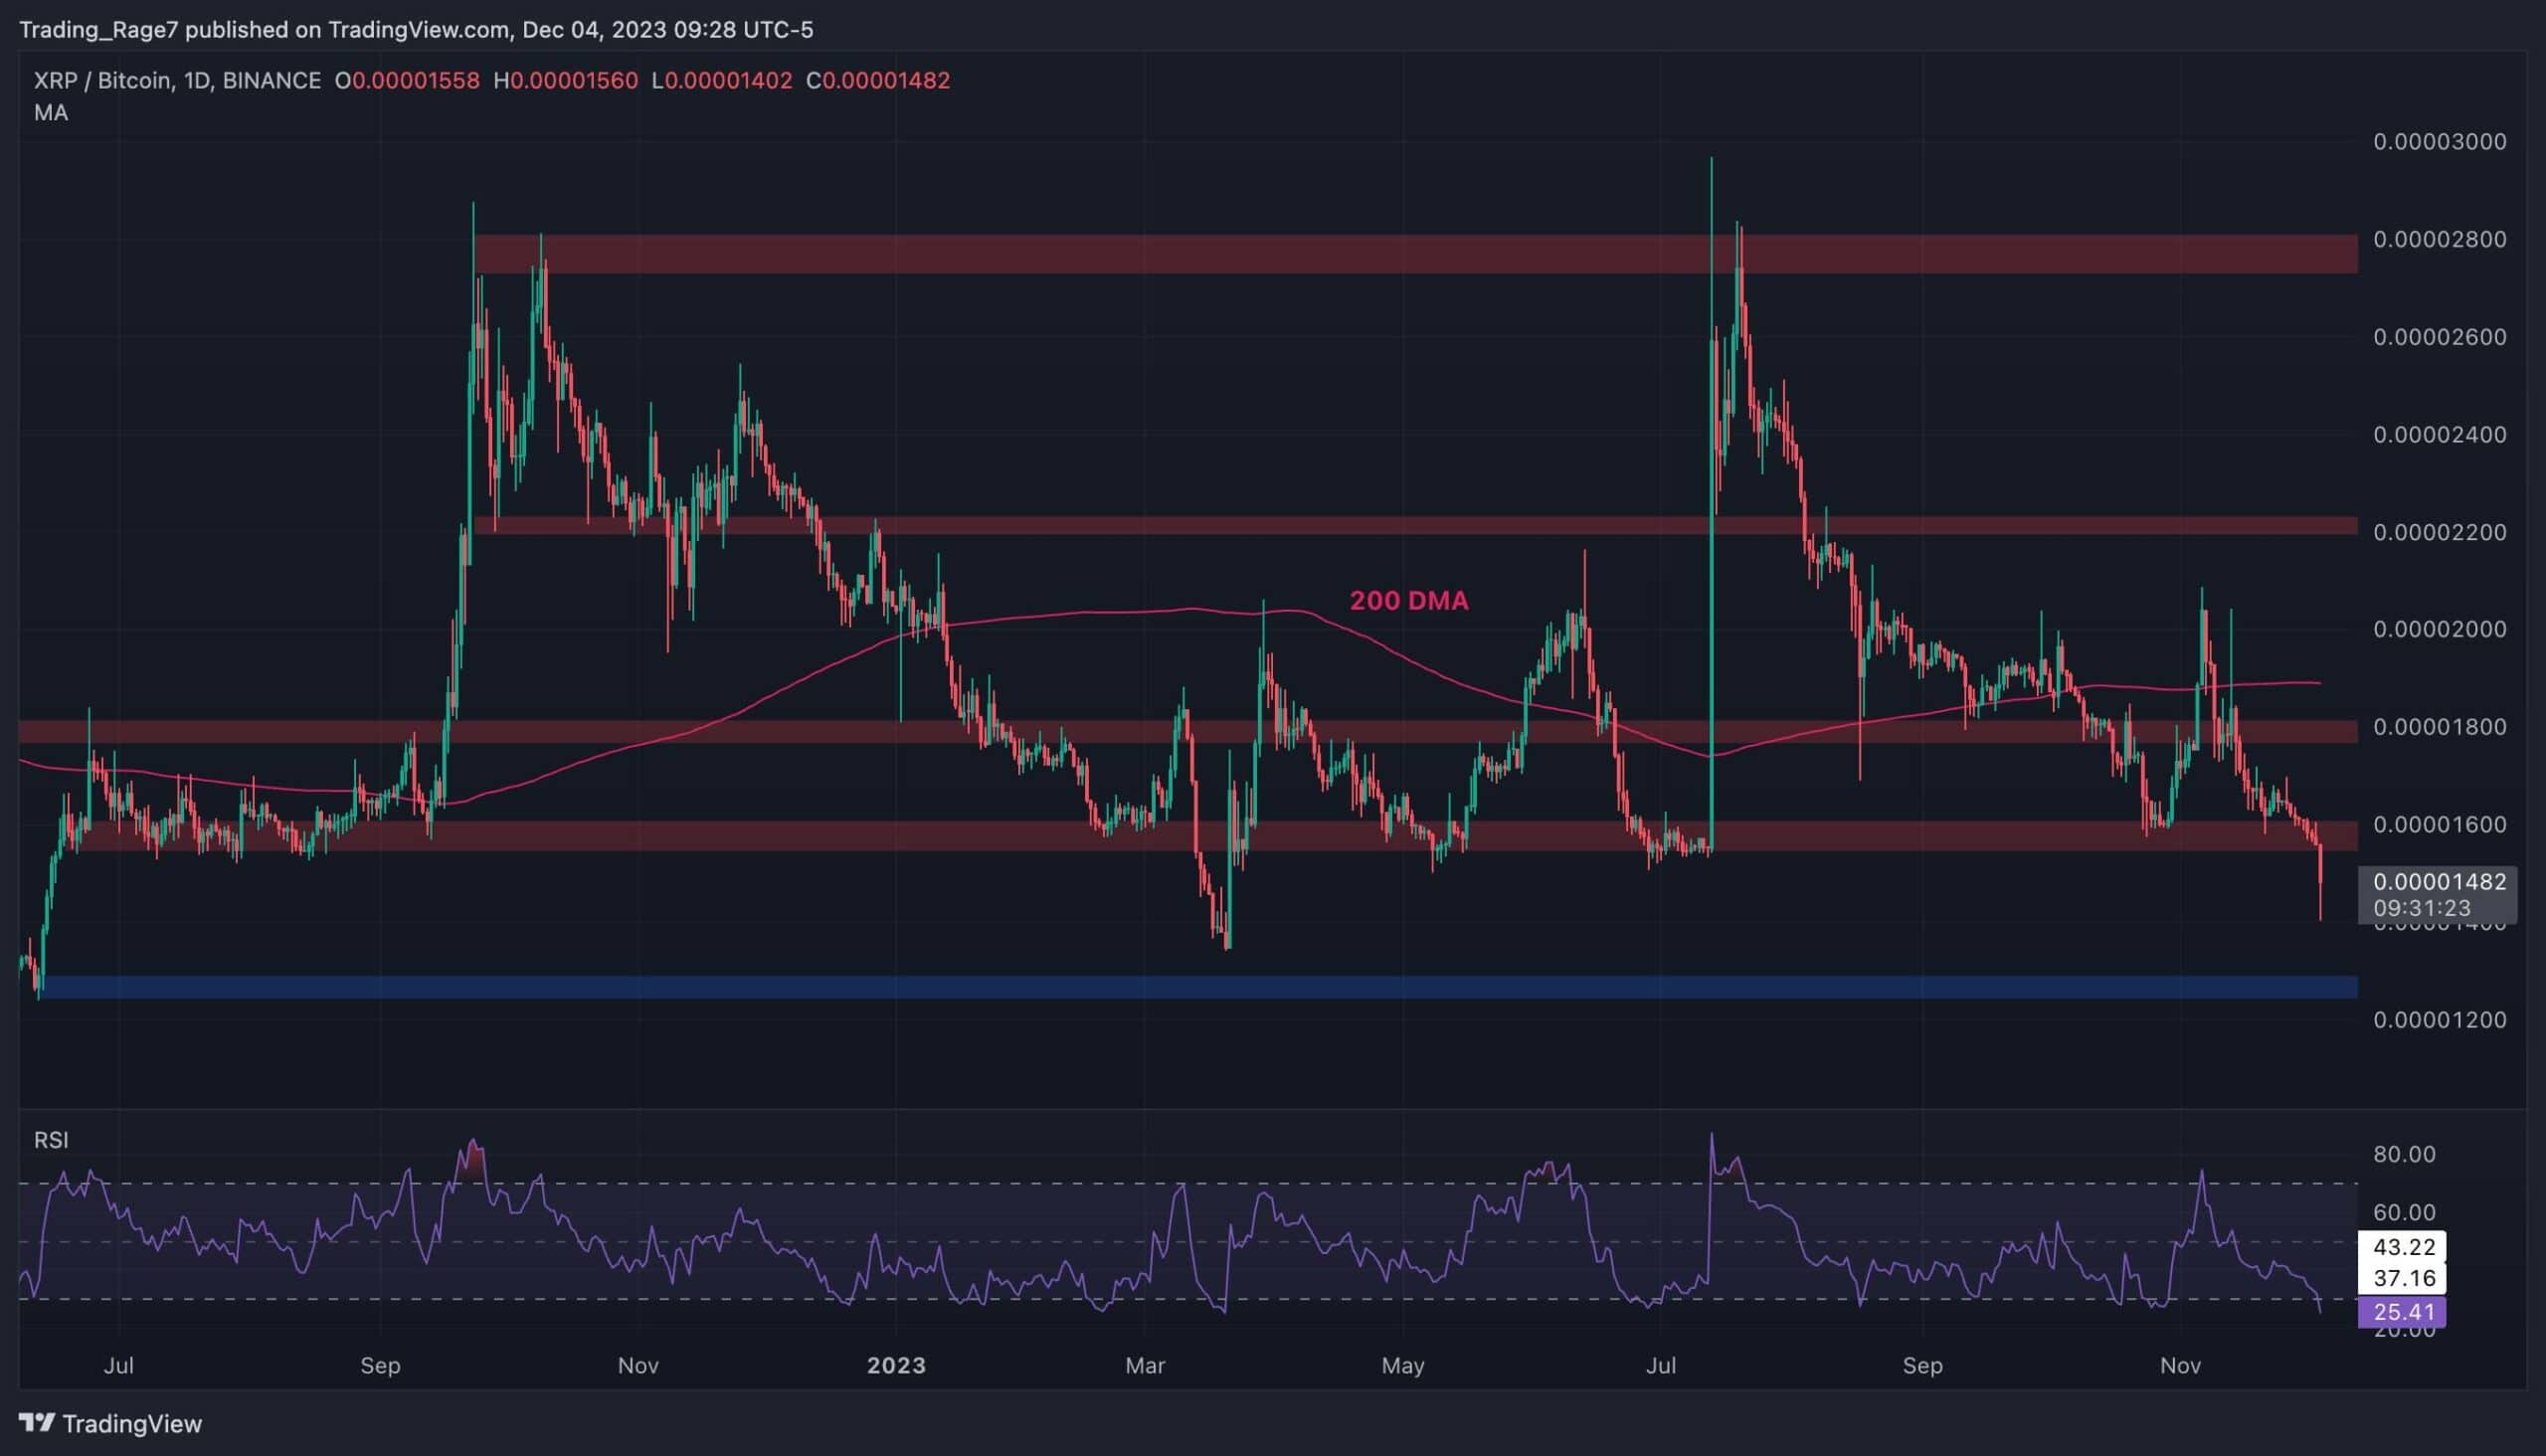 Is-xrp-about-to-explode-like-bitcoin-or-is-a-correction-coming?-(ripple-price-analysis)